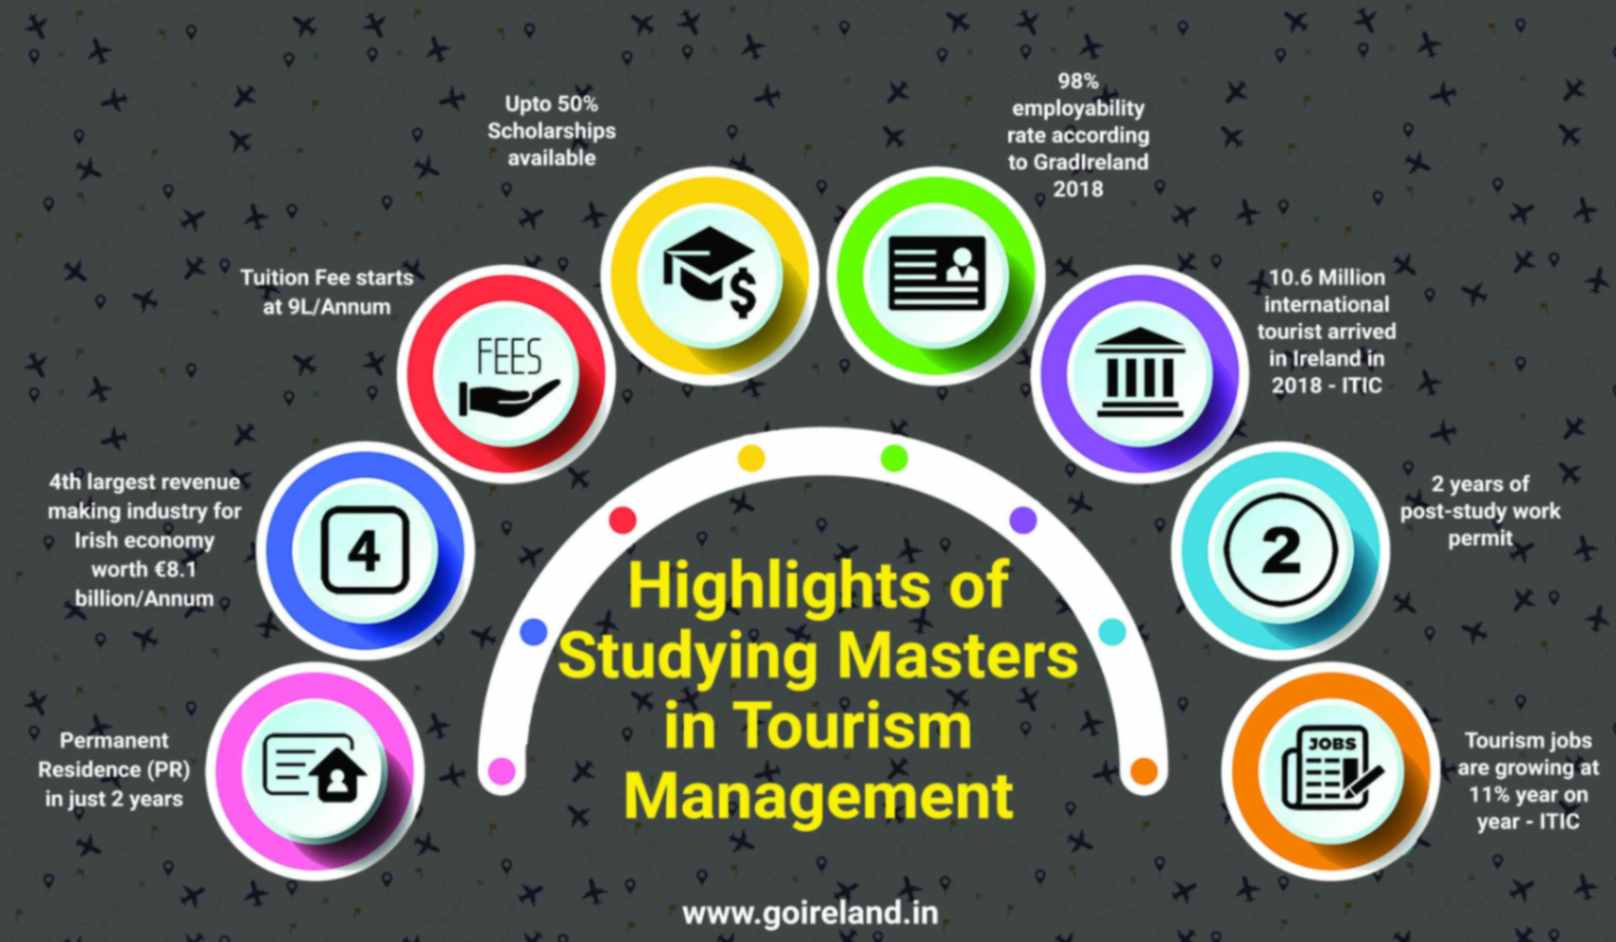 Highlights of Studying Masters in Tourism Management